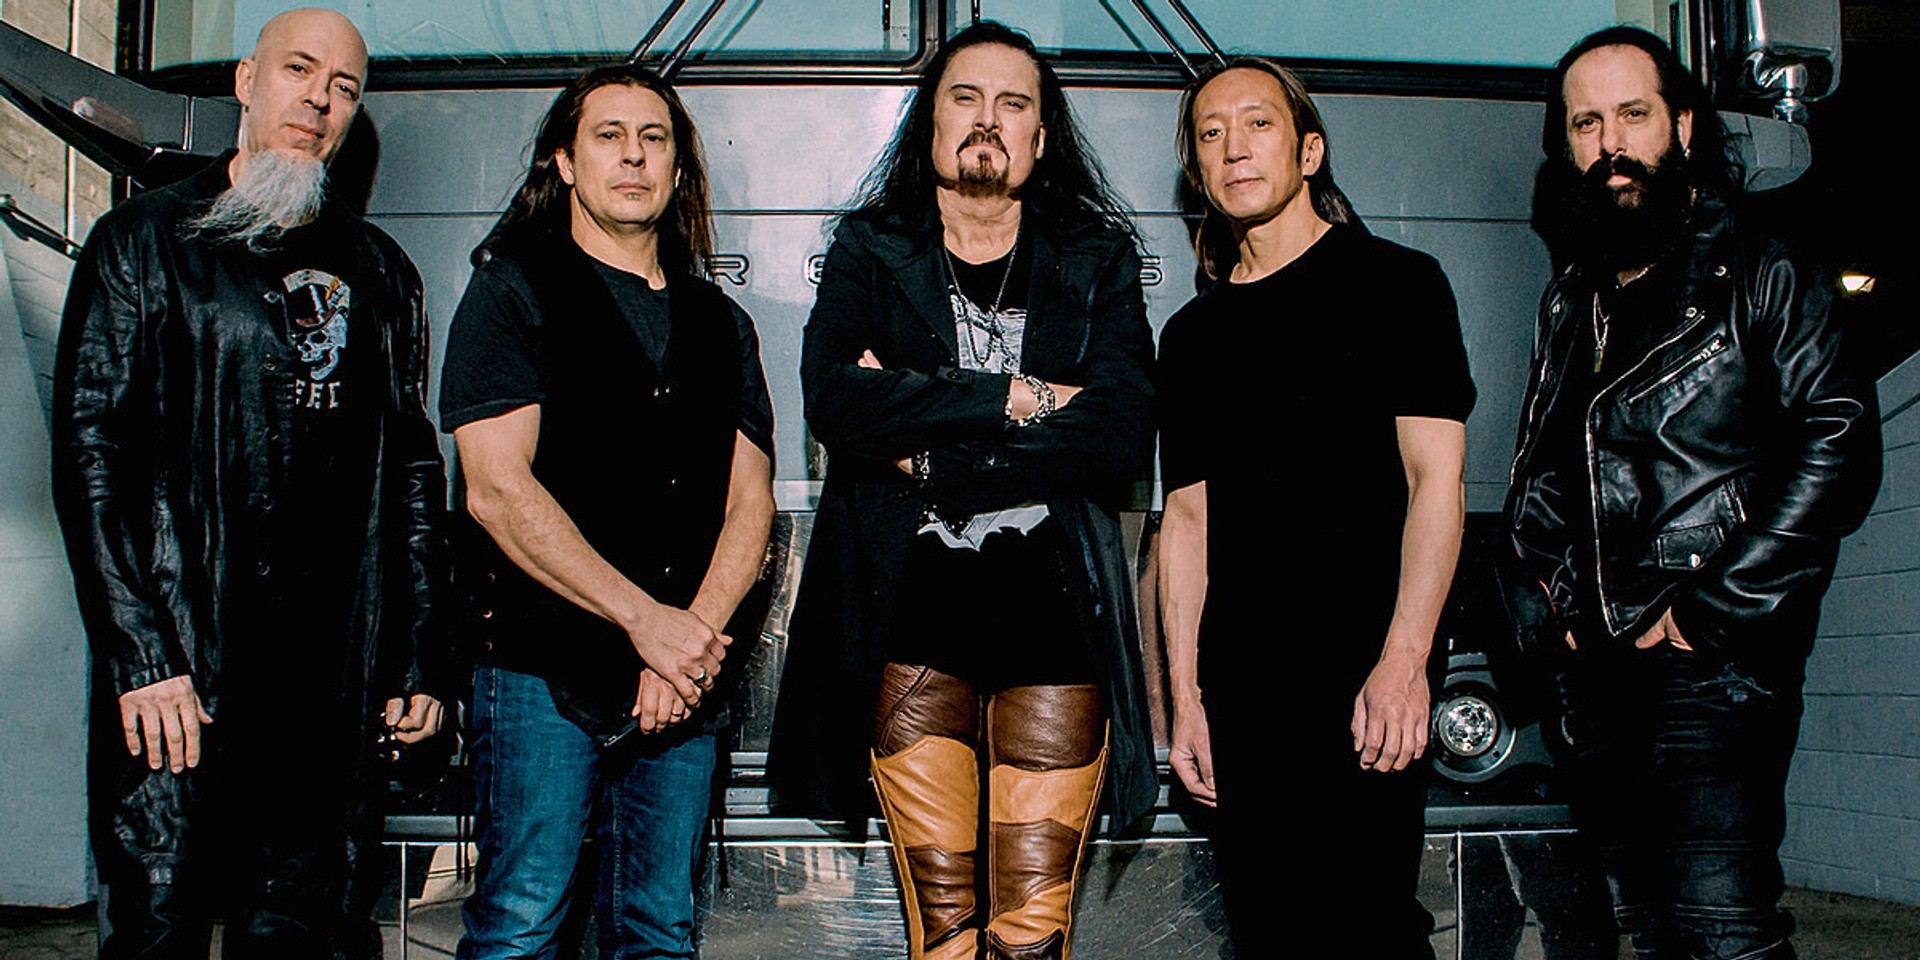 DREAM THEATER announces Asia tour – shows in Singapore, Manila, Bangkok and more confirmed